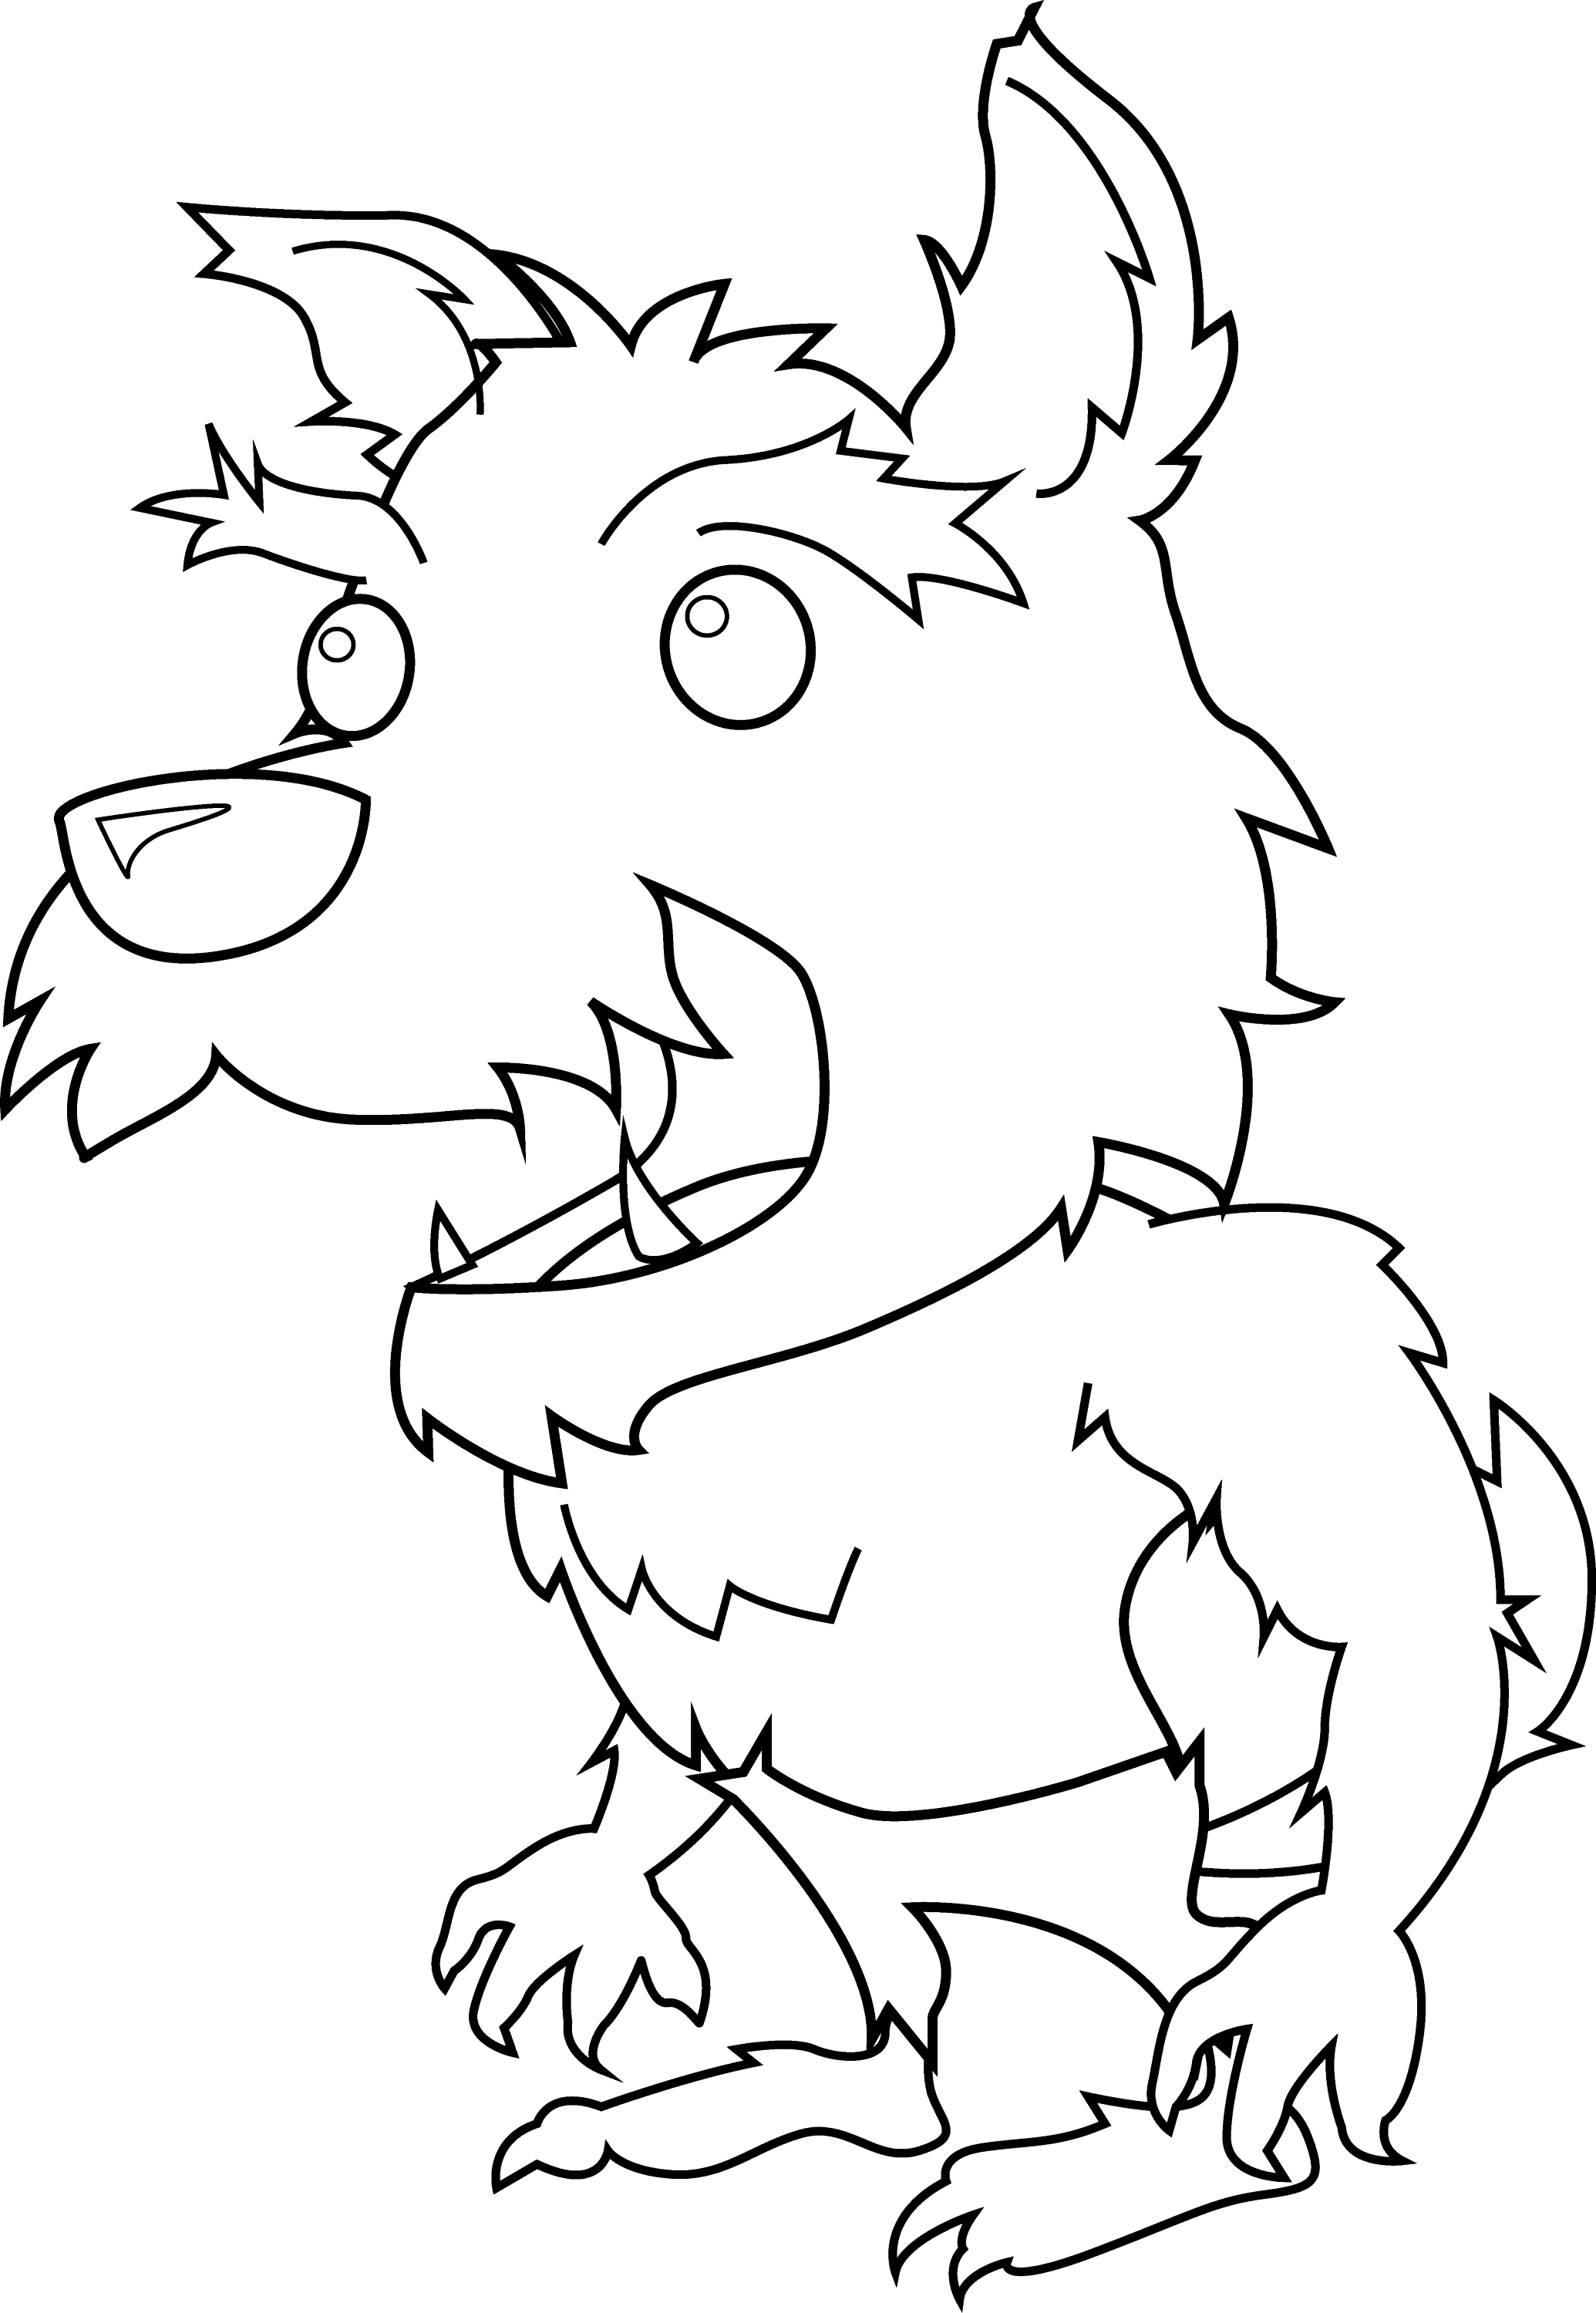 11+ Werewolf Coloring Page